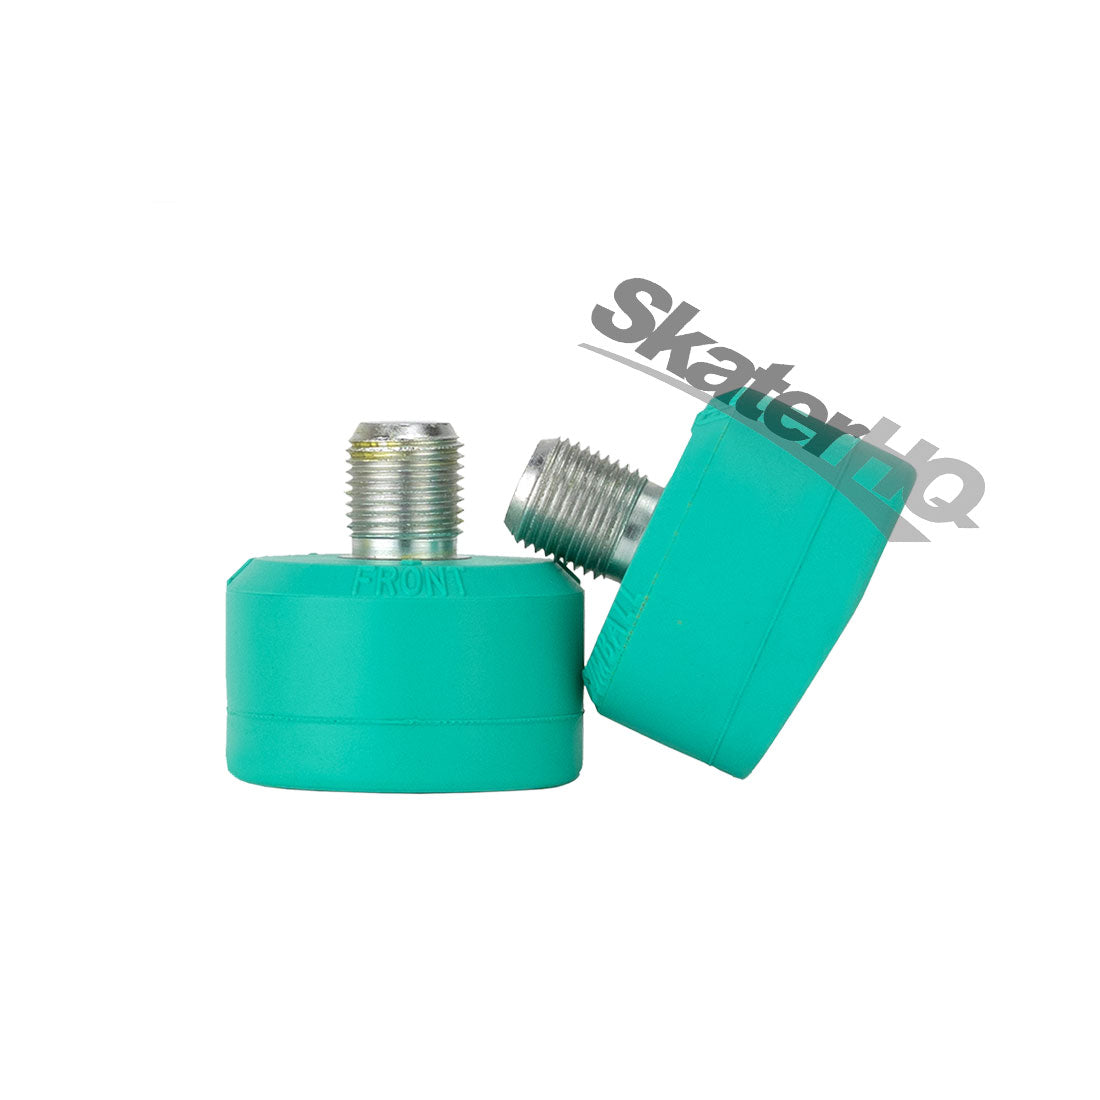 Gumball Toe Stops - Short Stem - Mint 83A Roller Skate Hardware and Parts